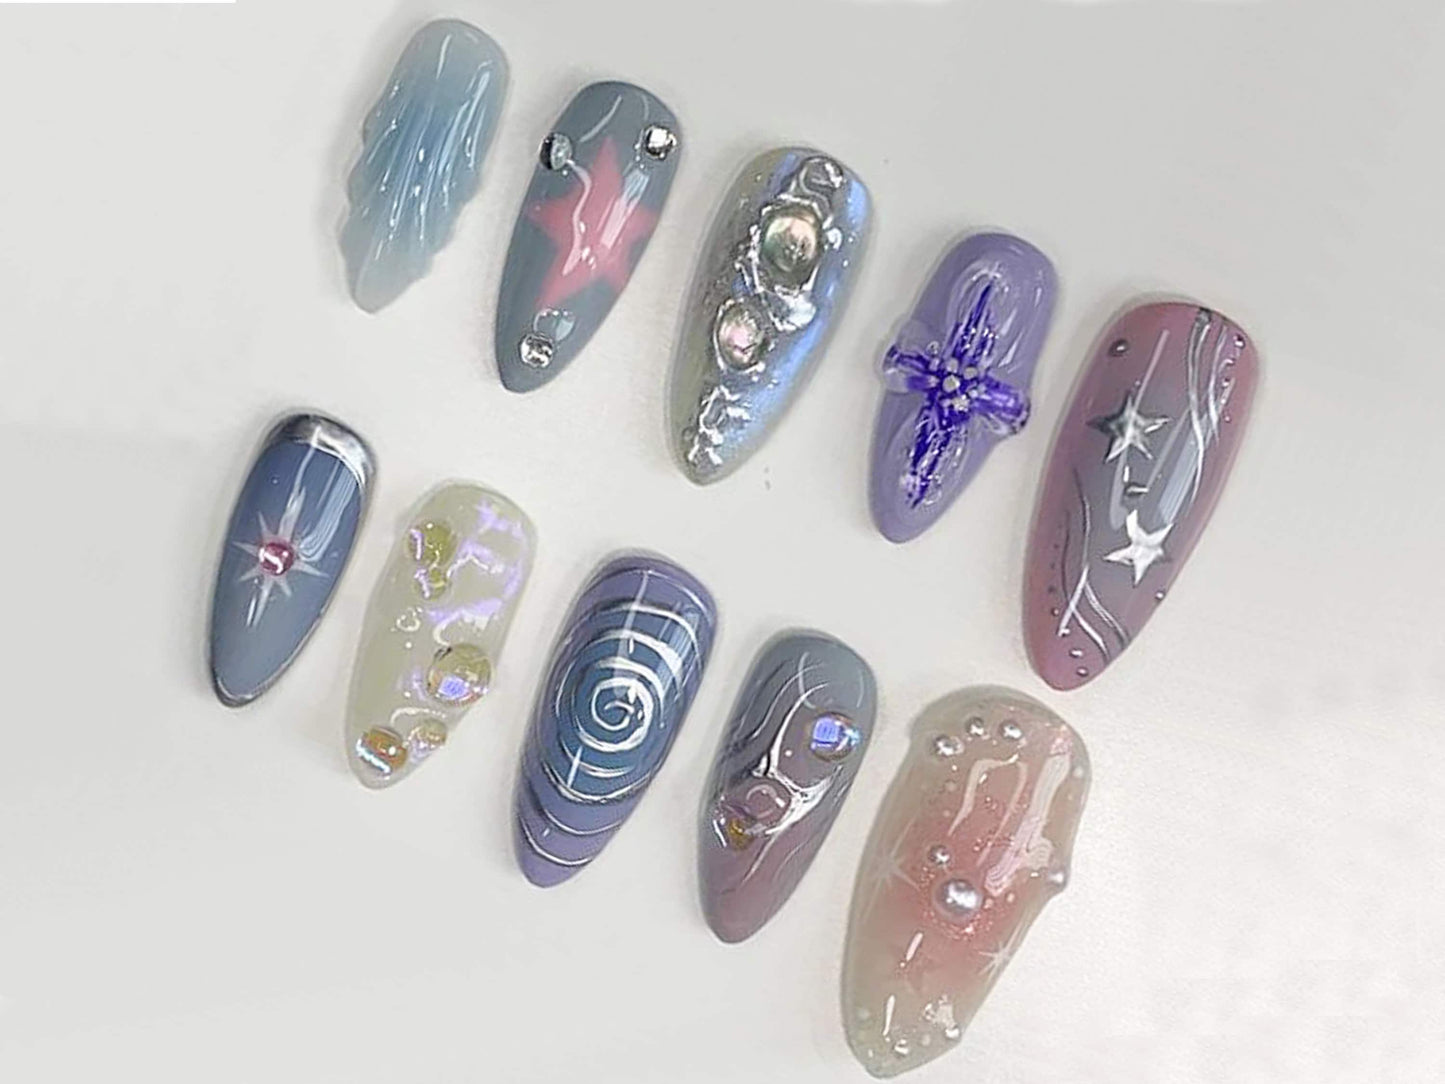 Freestyle 3D Gel Nails| Trendy Press On Nails with Unique Designs | Gel X Nails | Handcrafted Press On Nails| Almond Nails | J37